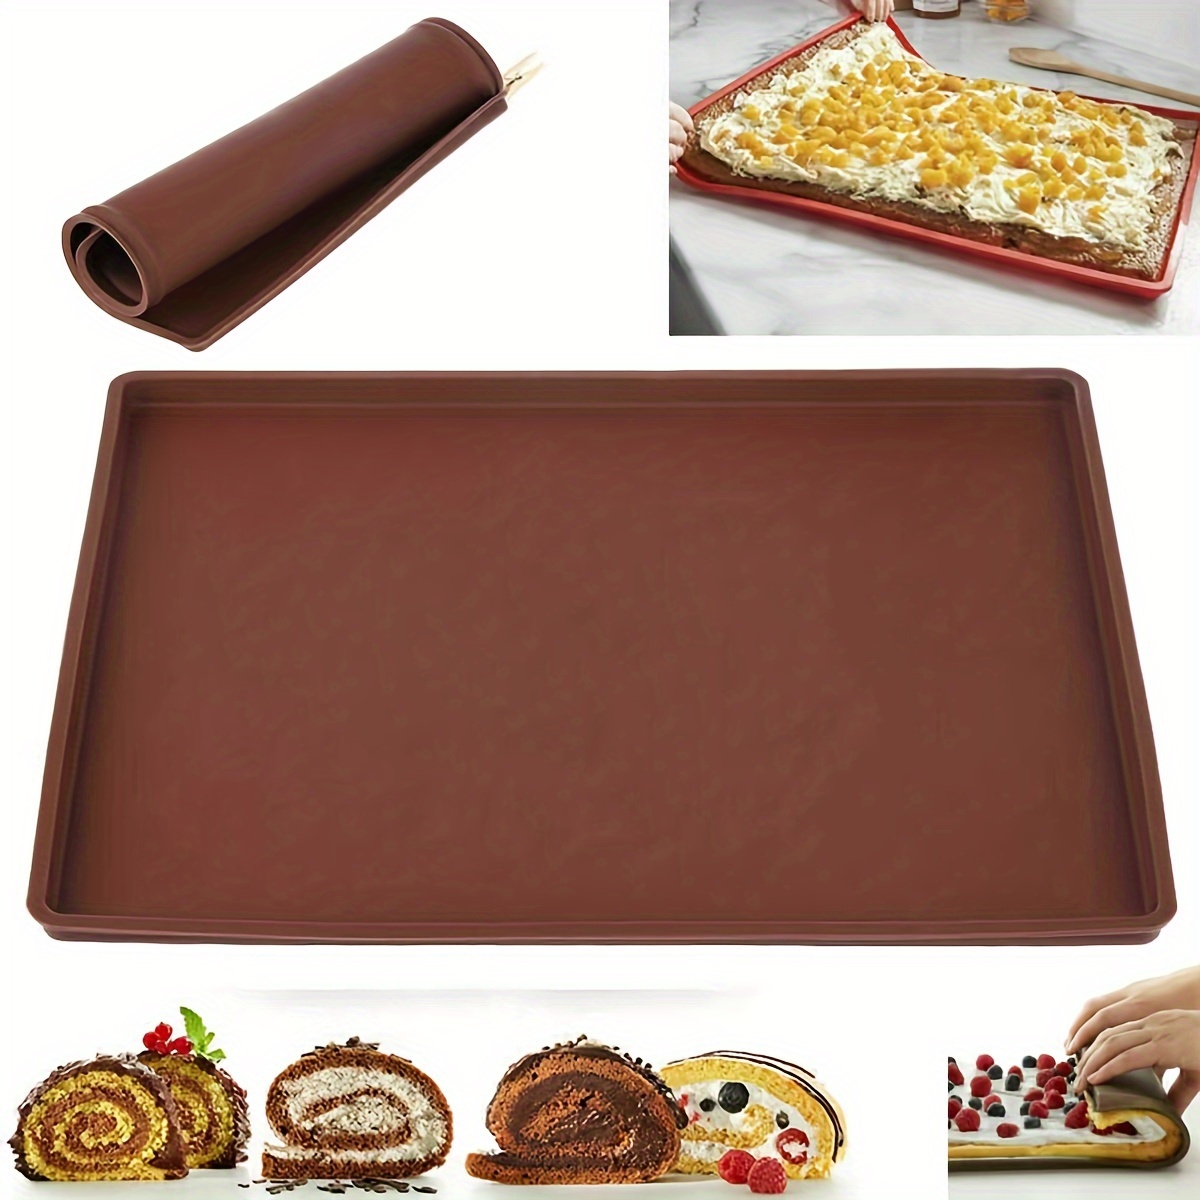 

1pc, Swiss Roll Cake Mat, Flexible Silicone Baking Tray, Heat Resistant Jelly Roll Pan, Silicone Cookies Mold, Kitchen Baking Tools